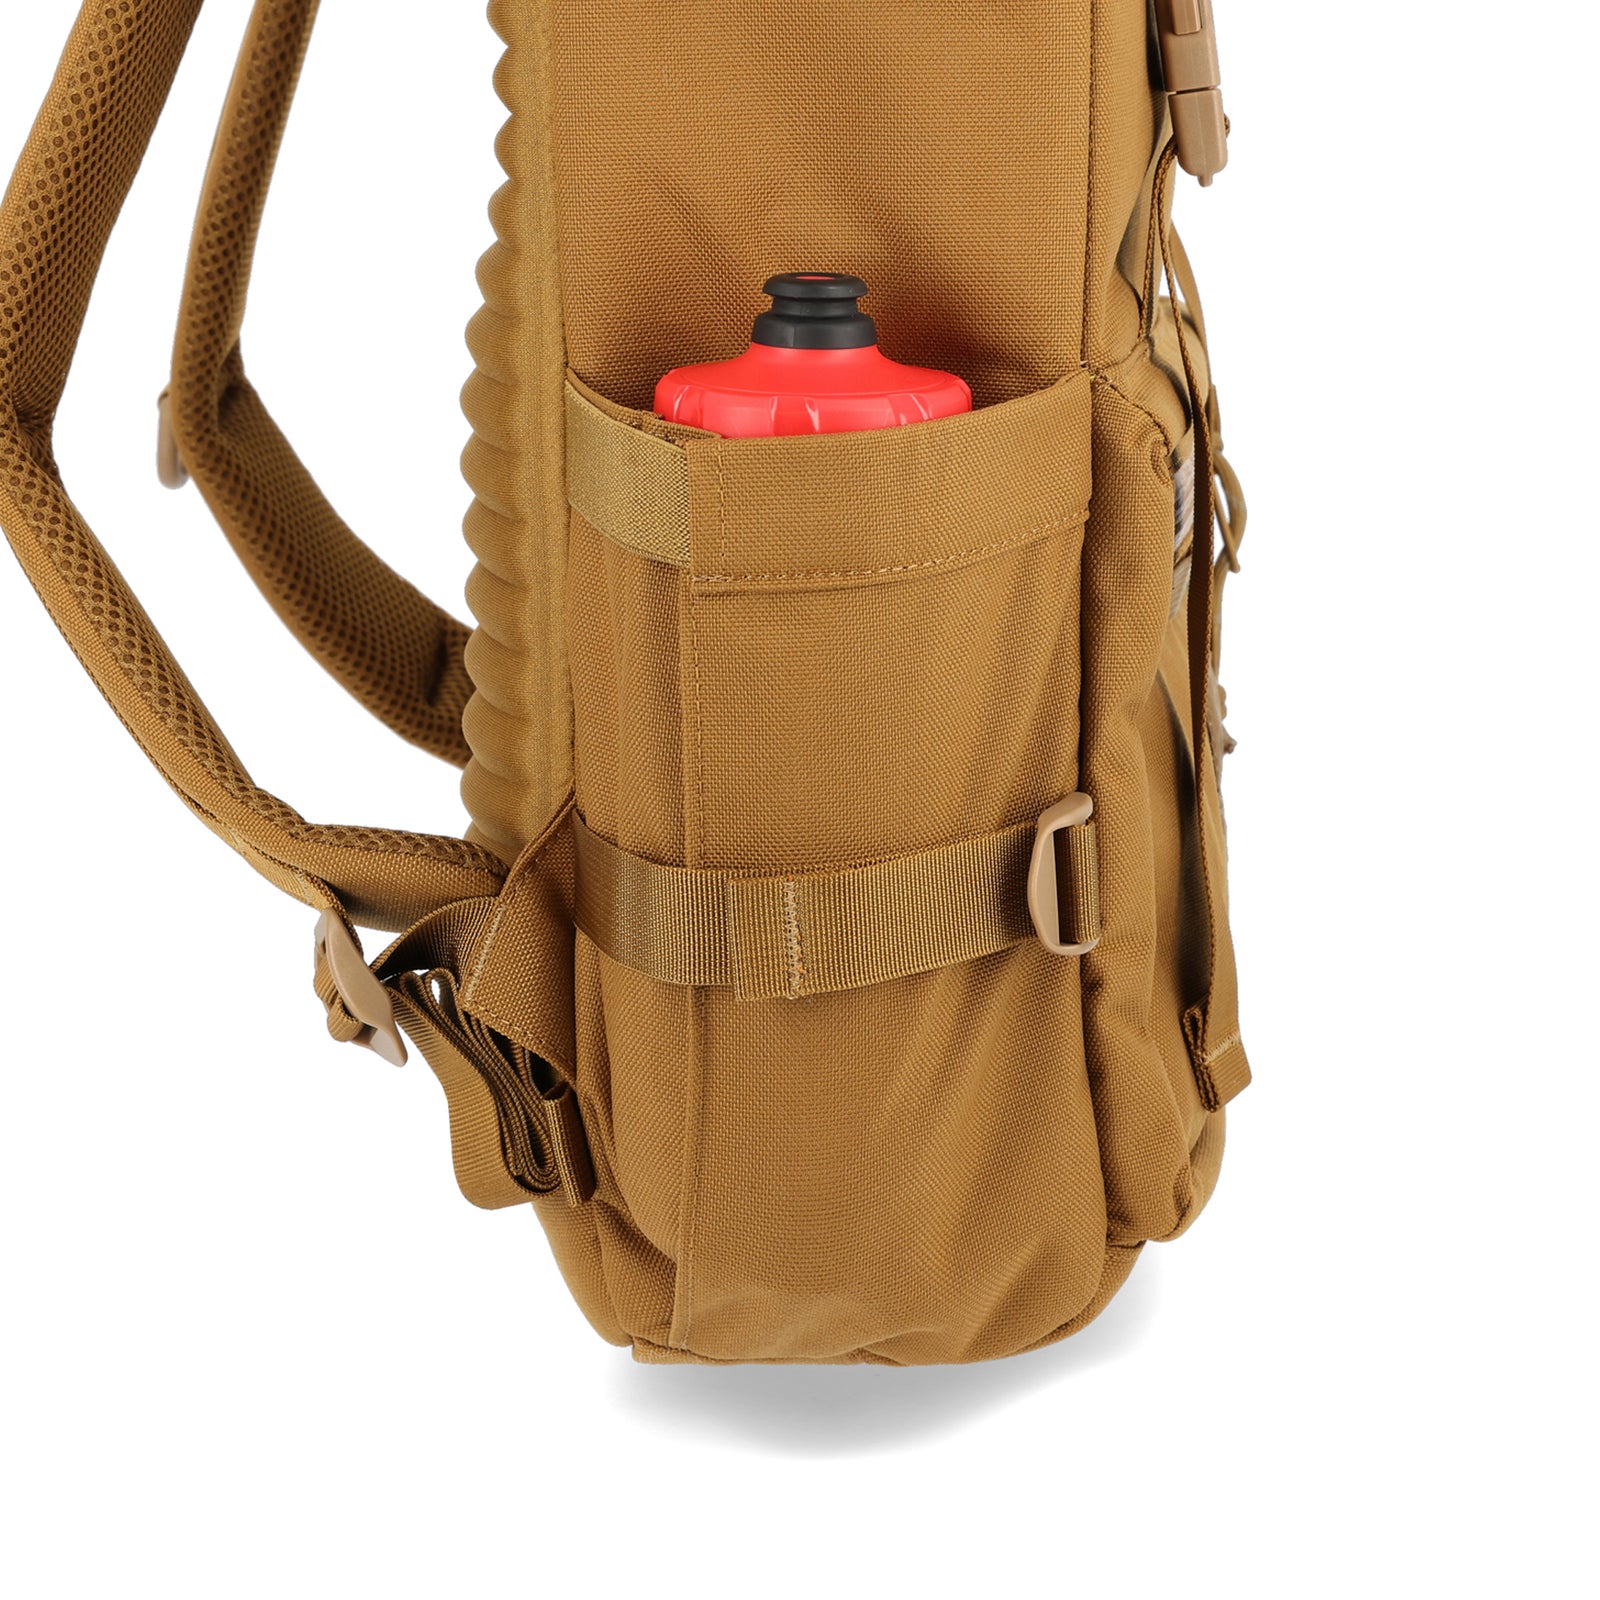 General detail Shot of the Topo Designs Rover Pack Tech in "Dark Khaki" brown showing expandable water bottle side pockets